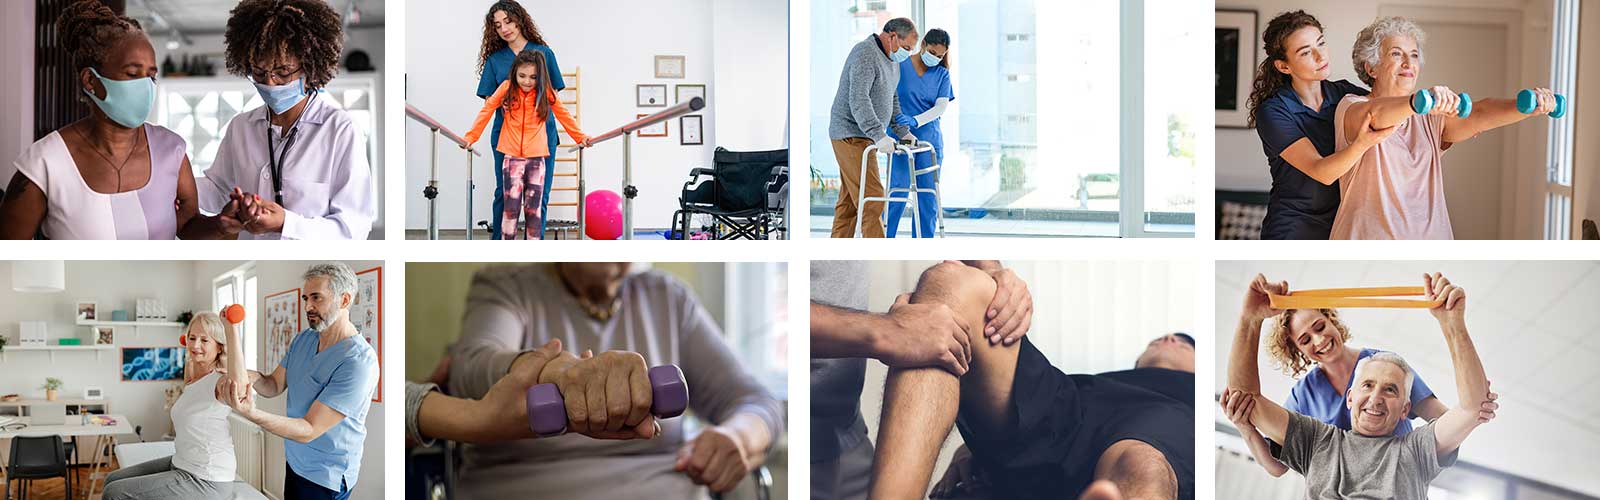 A selection of images of people various rehabilitation aides at work